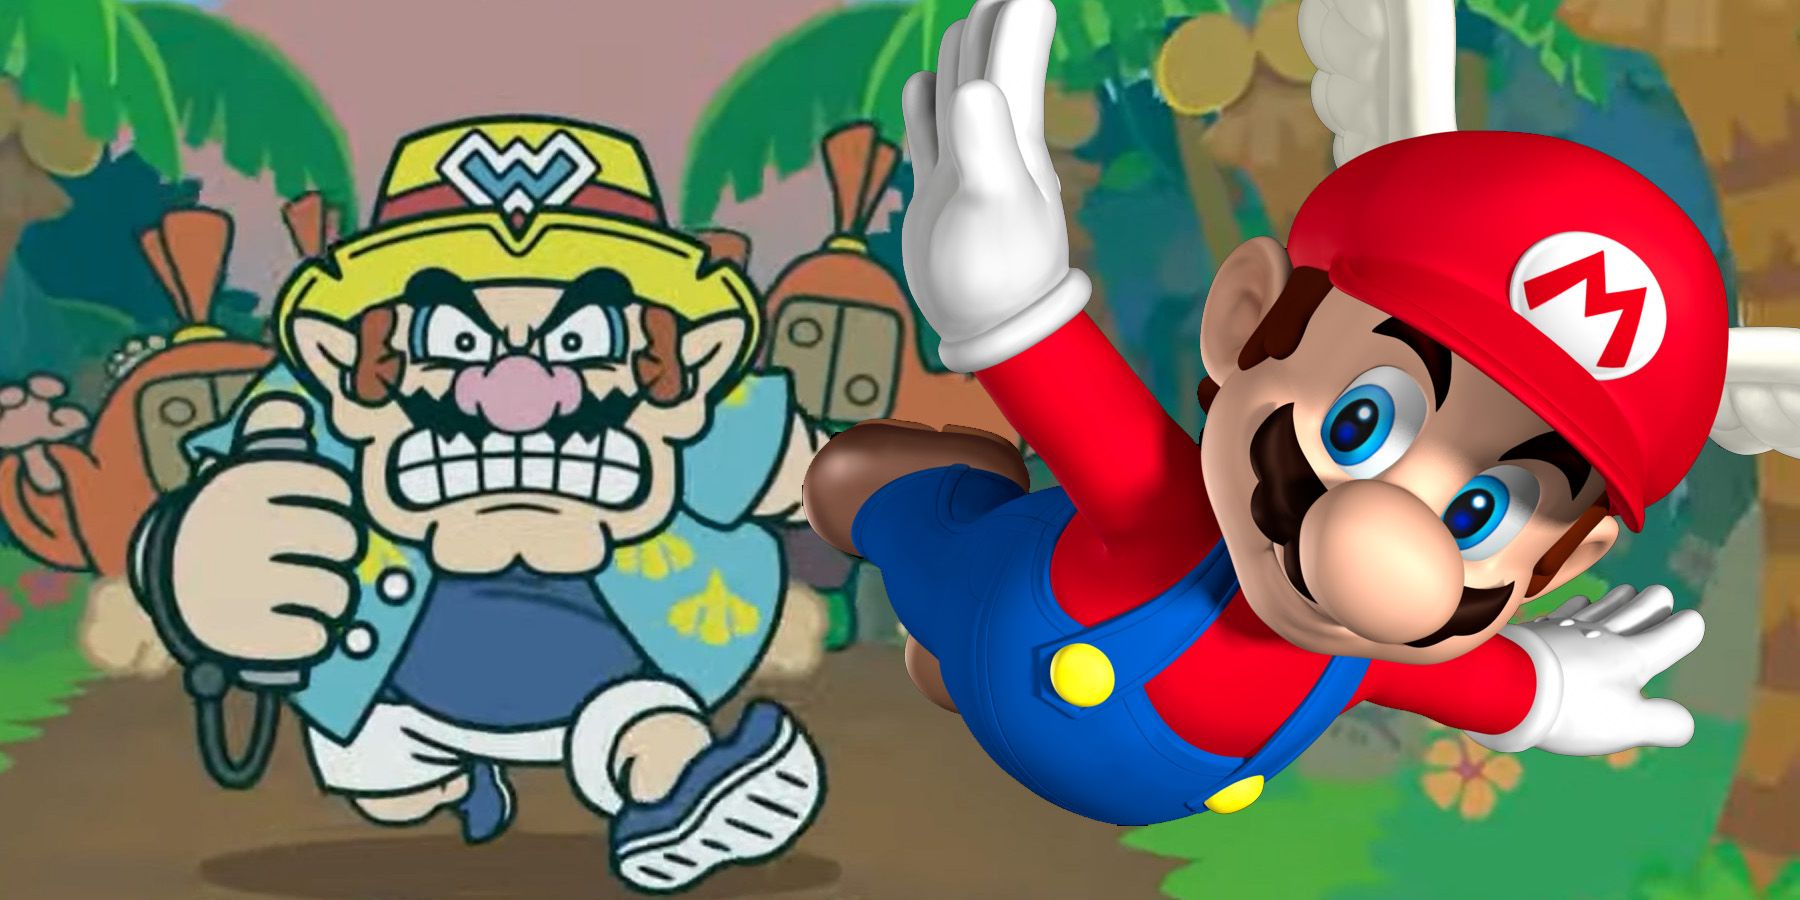 A screenshot of Wario running from an angry crowd in WarioWare Move It, with a winged Mario from Super Mario 64 flying alongside him.